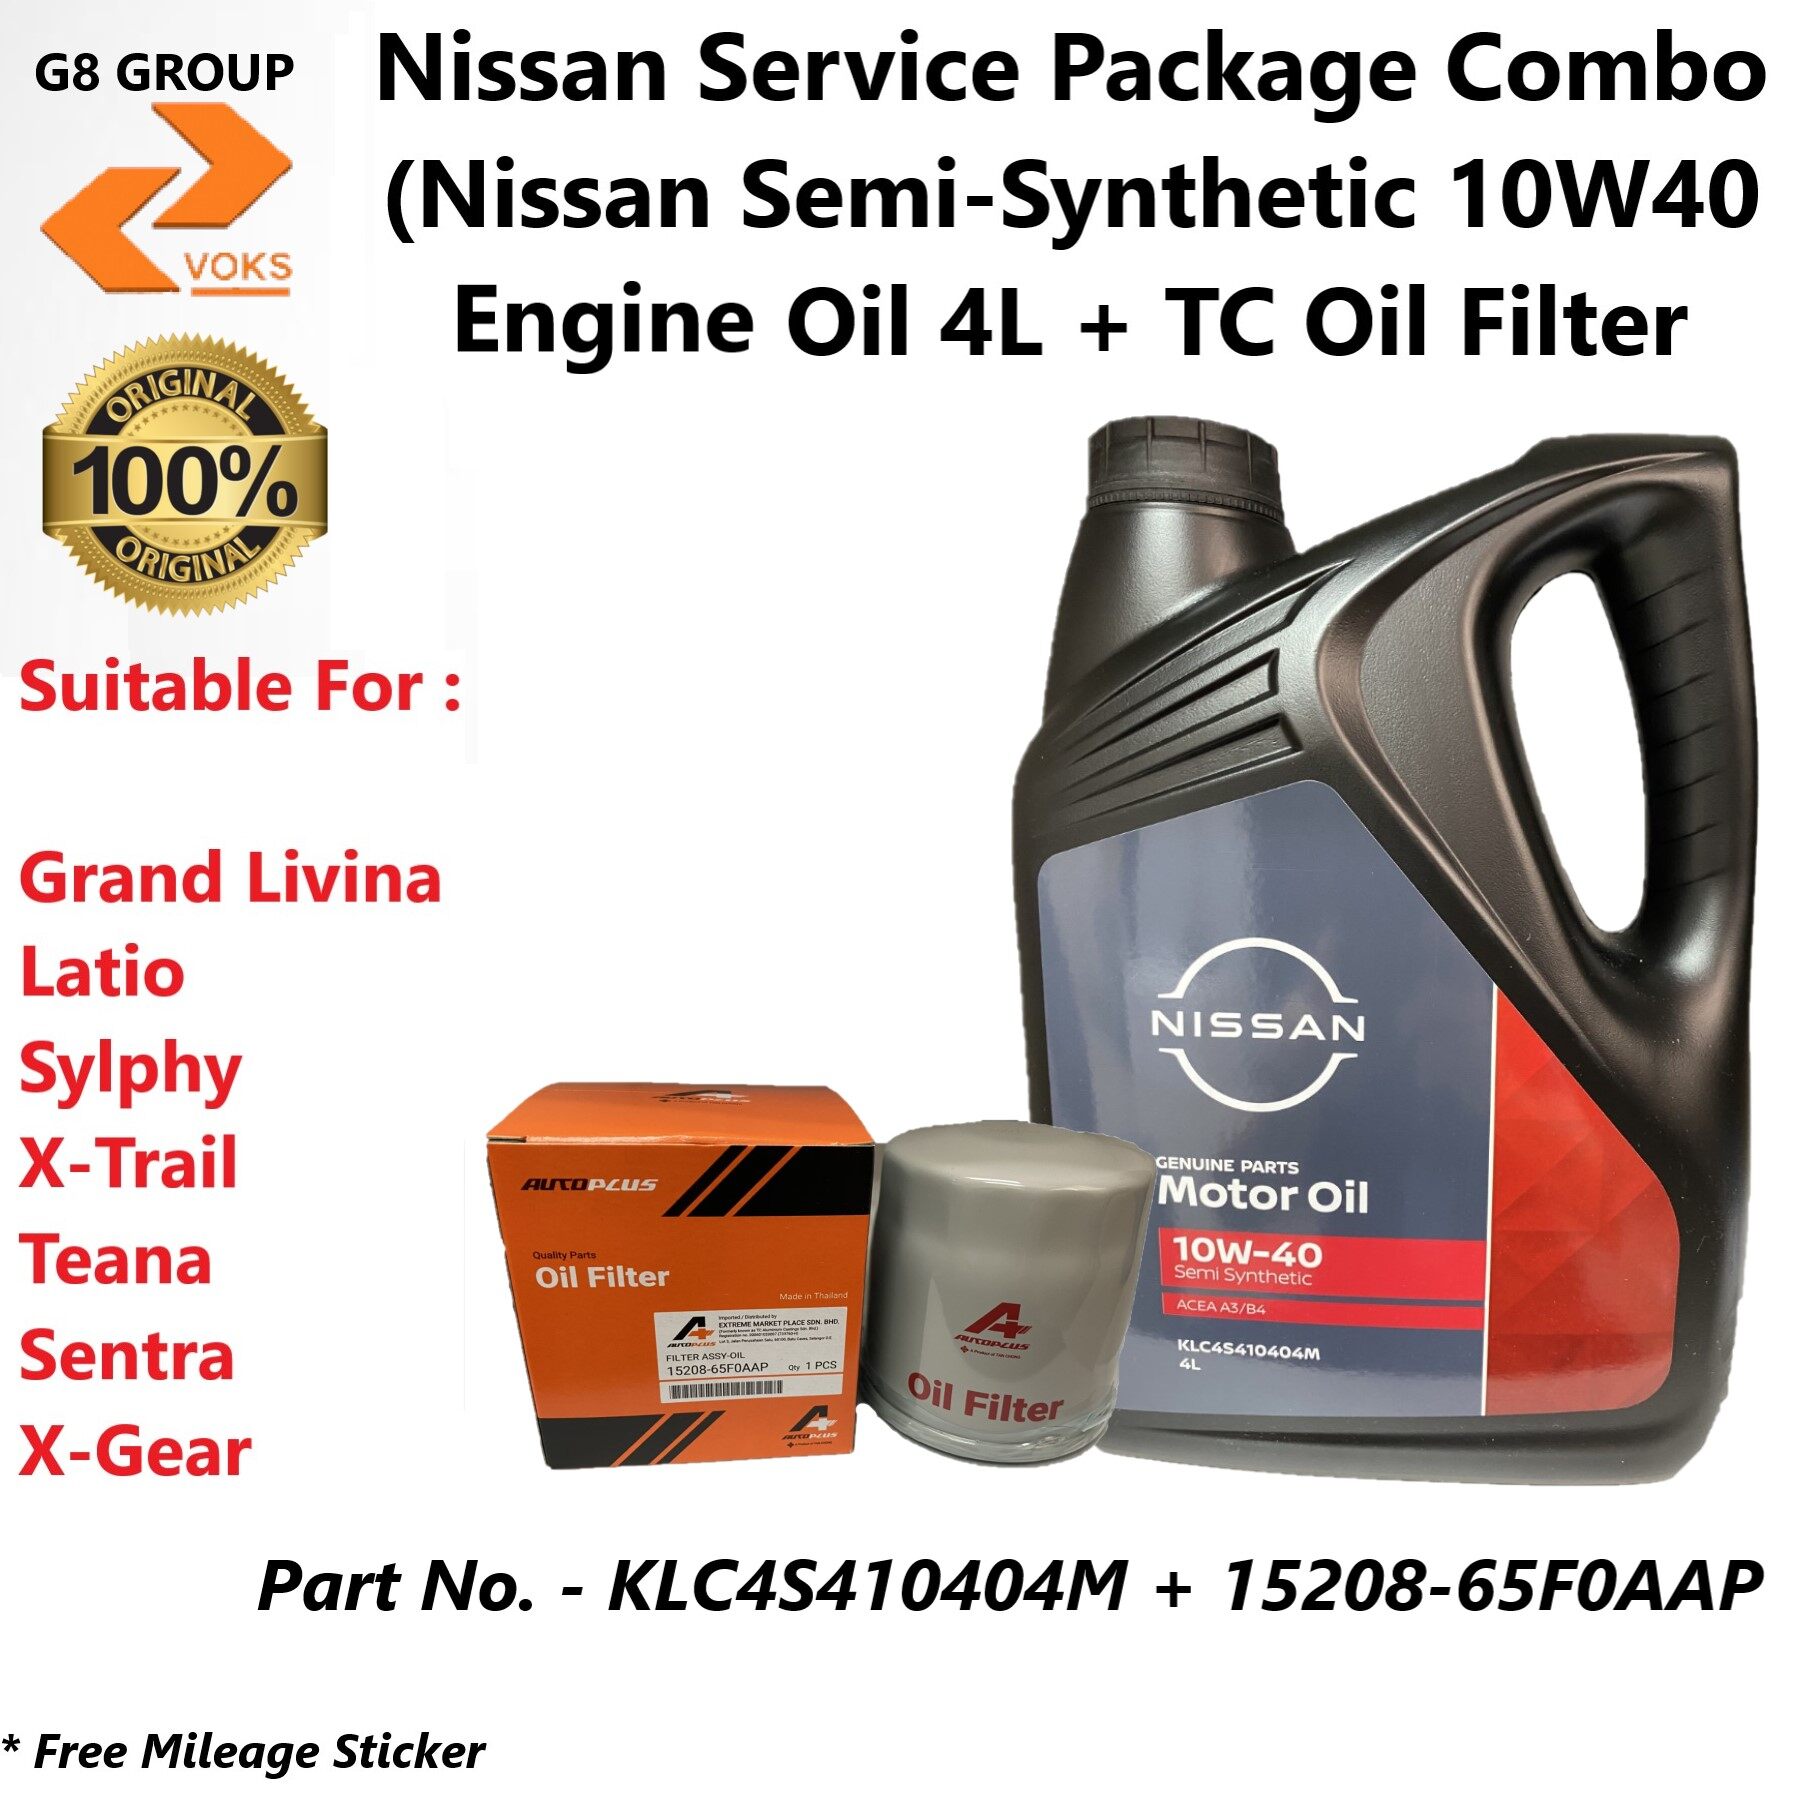 Nissan Service Package Combo NISSAN SEMI SYNTHETIC 10W40 ENGINE OIL 4L + TC OIL FILTER KLC4S410404M + 15208-65F0AAP